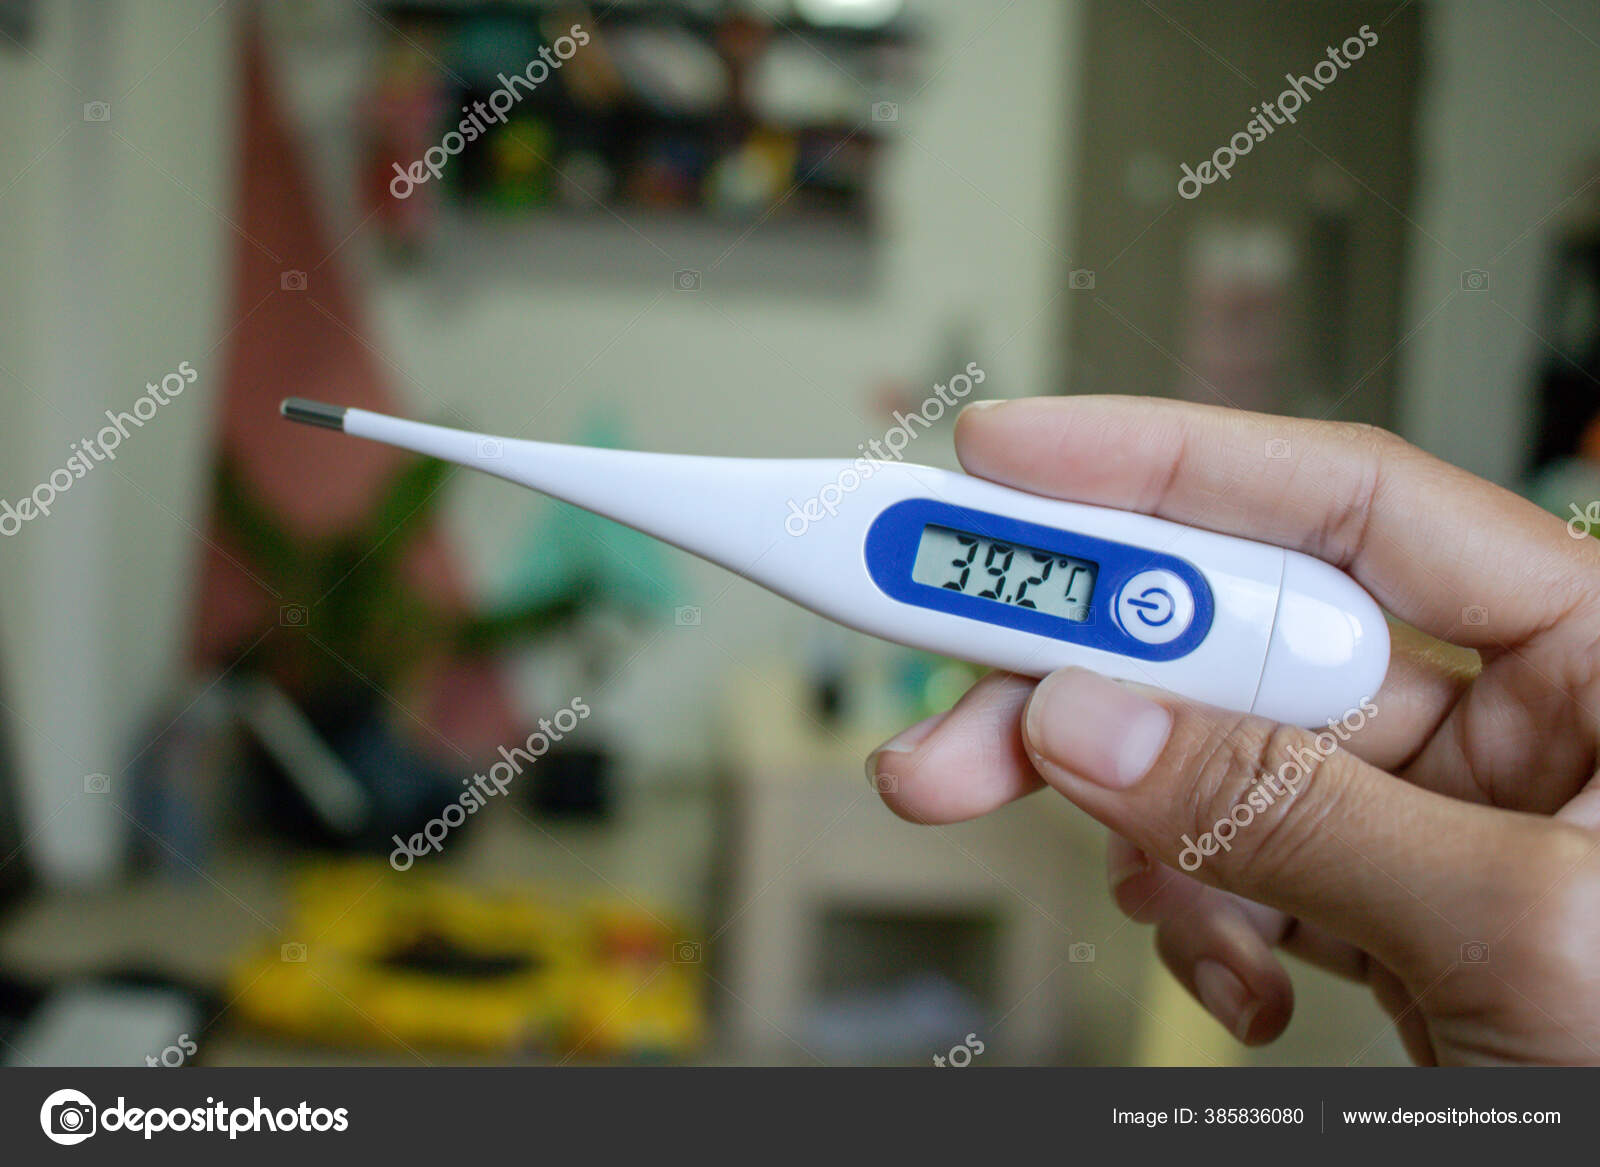 Thermometer with a High Fever Temperature Stock Image - Image of